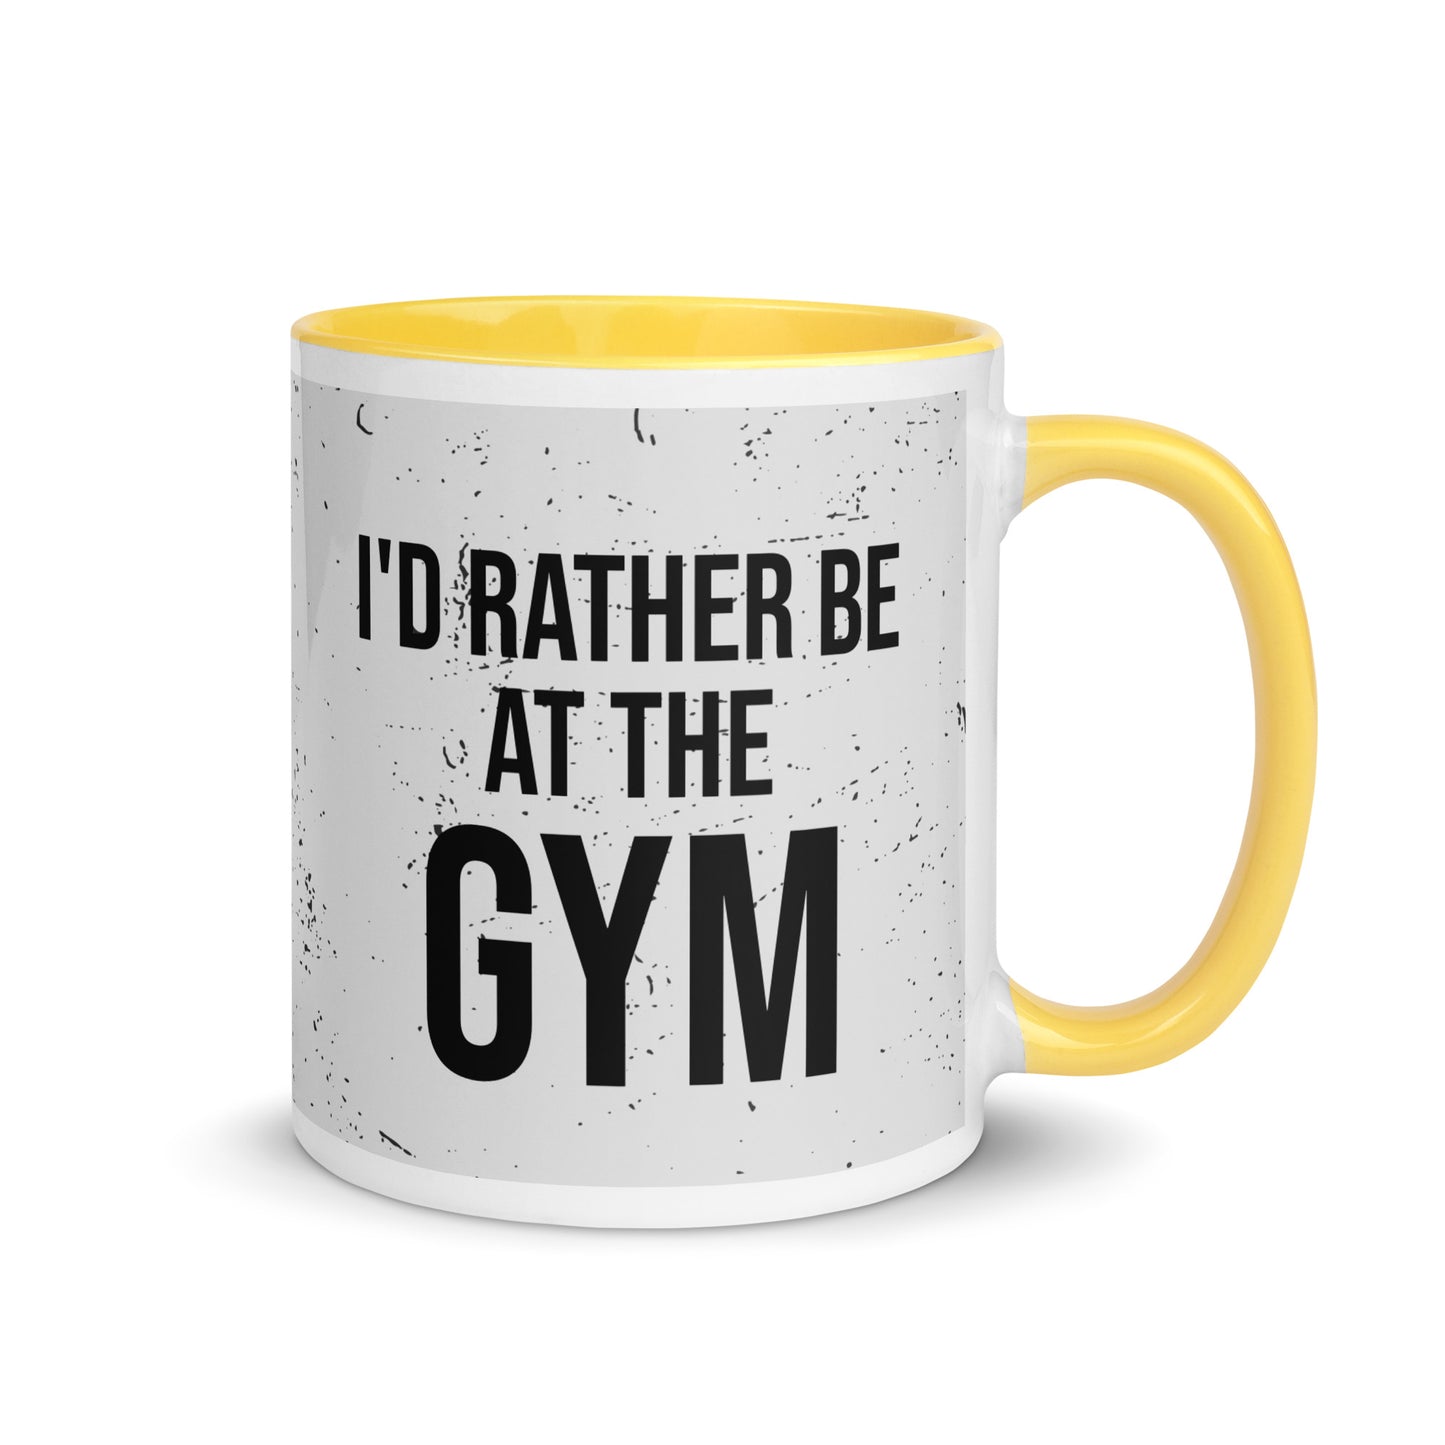 Yellow handled mug with I'd rather be at the gym written on it, across a grey splatter background. A gift for someone who loves the gym.